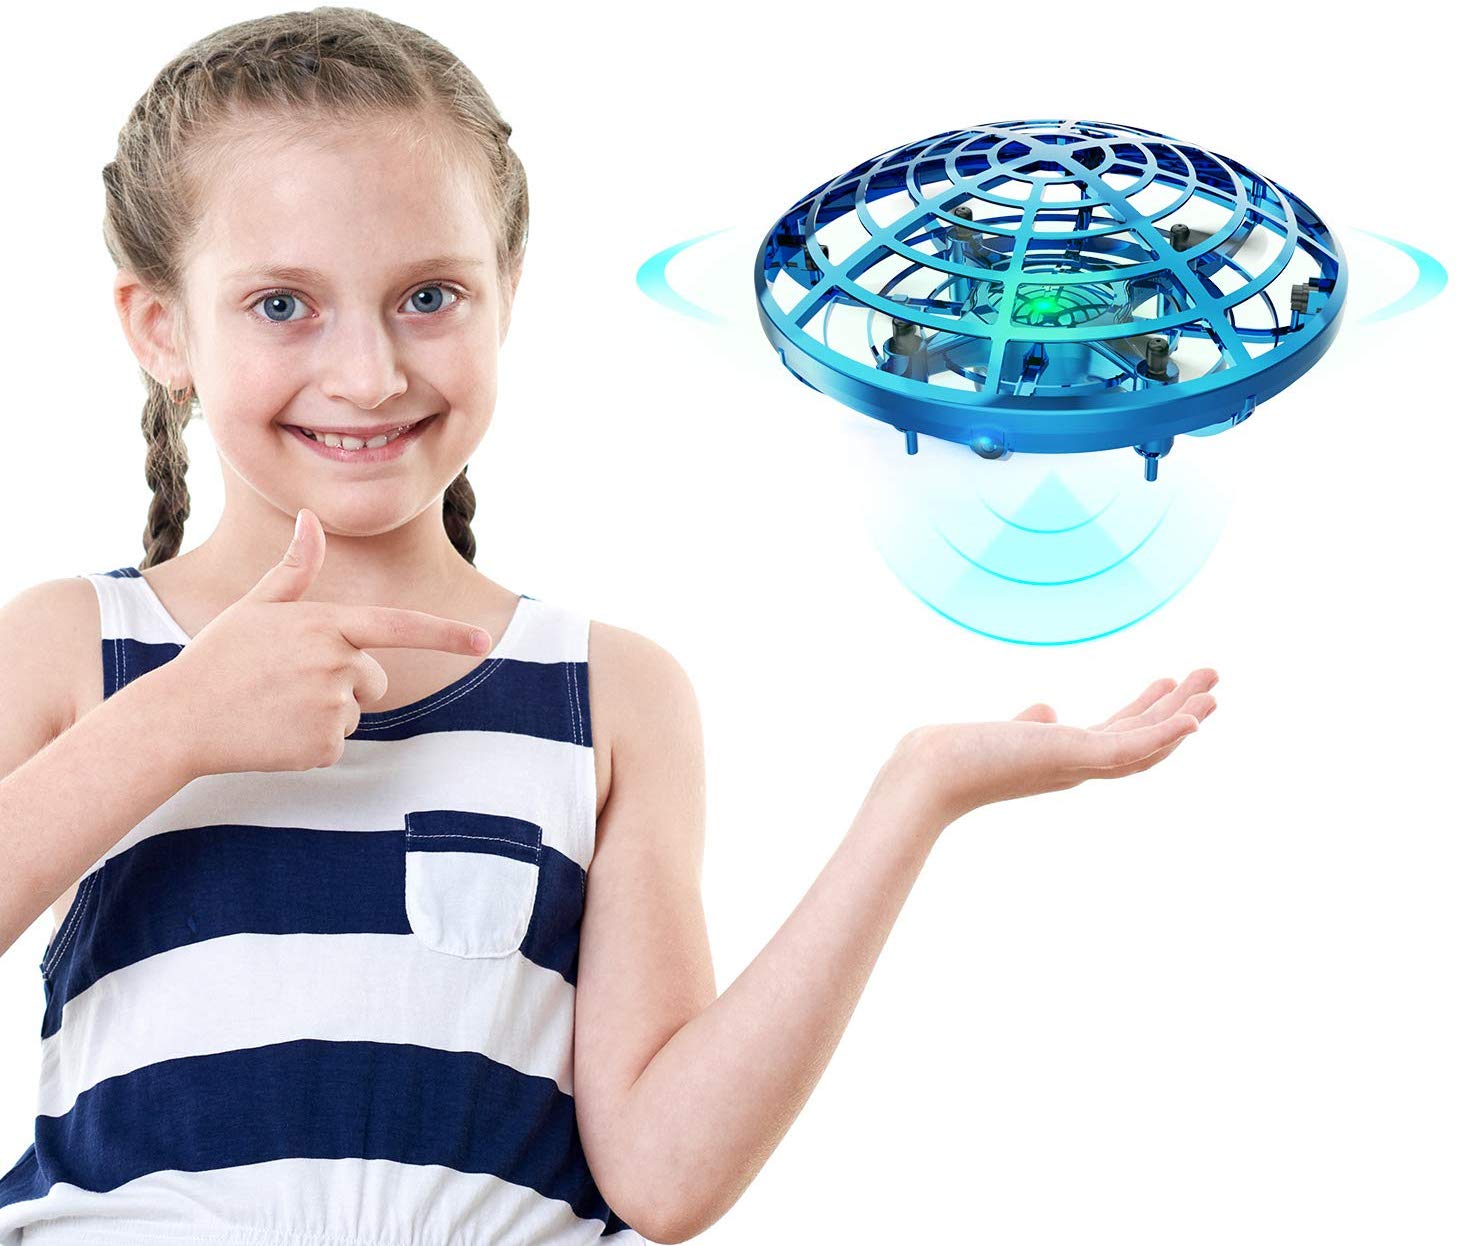 LIGHTNING DEAL!!! DEERC Drone for Kids Toys Hand Operated Mini Drone $16.28 (REG $31.99)